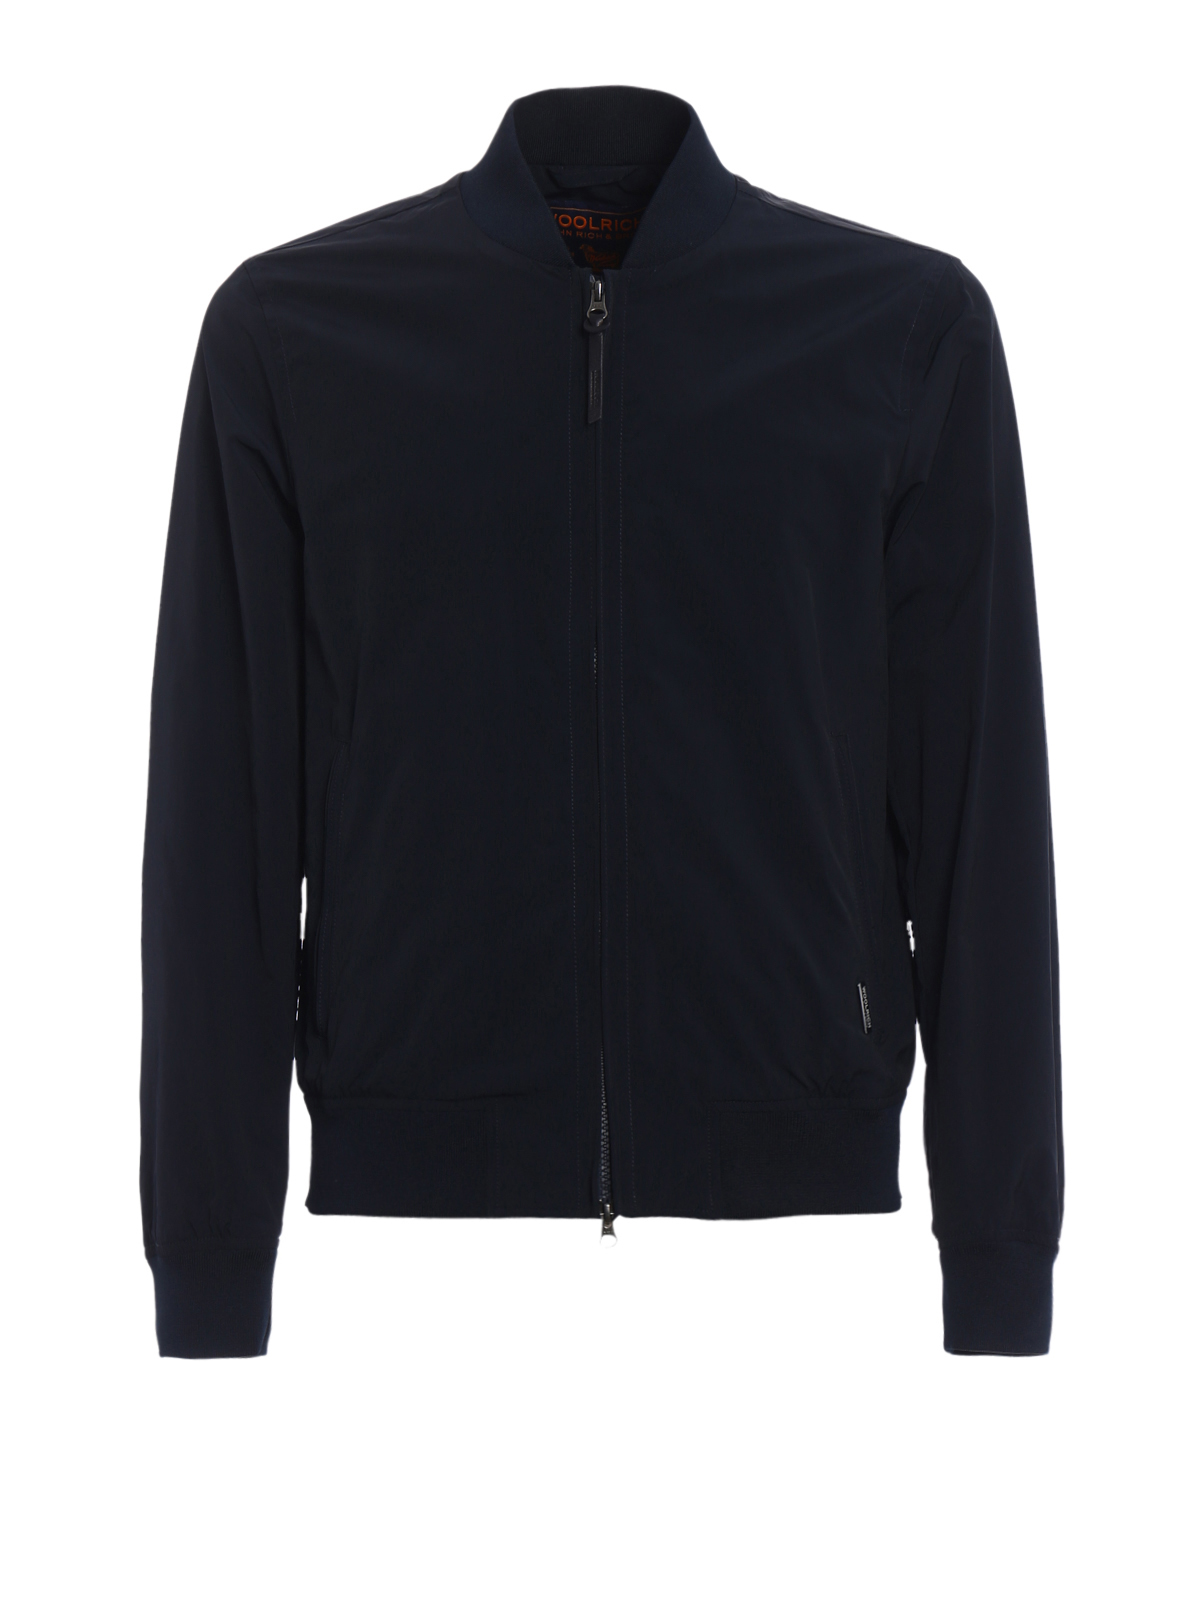 Bombers Woolrich - Shore blue bomber jacket - WOCPS2640SM20324 | iKRIX.com